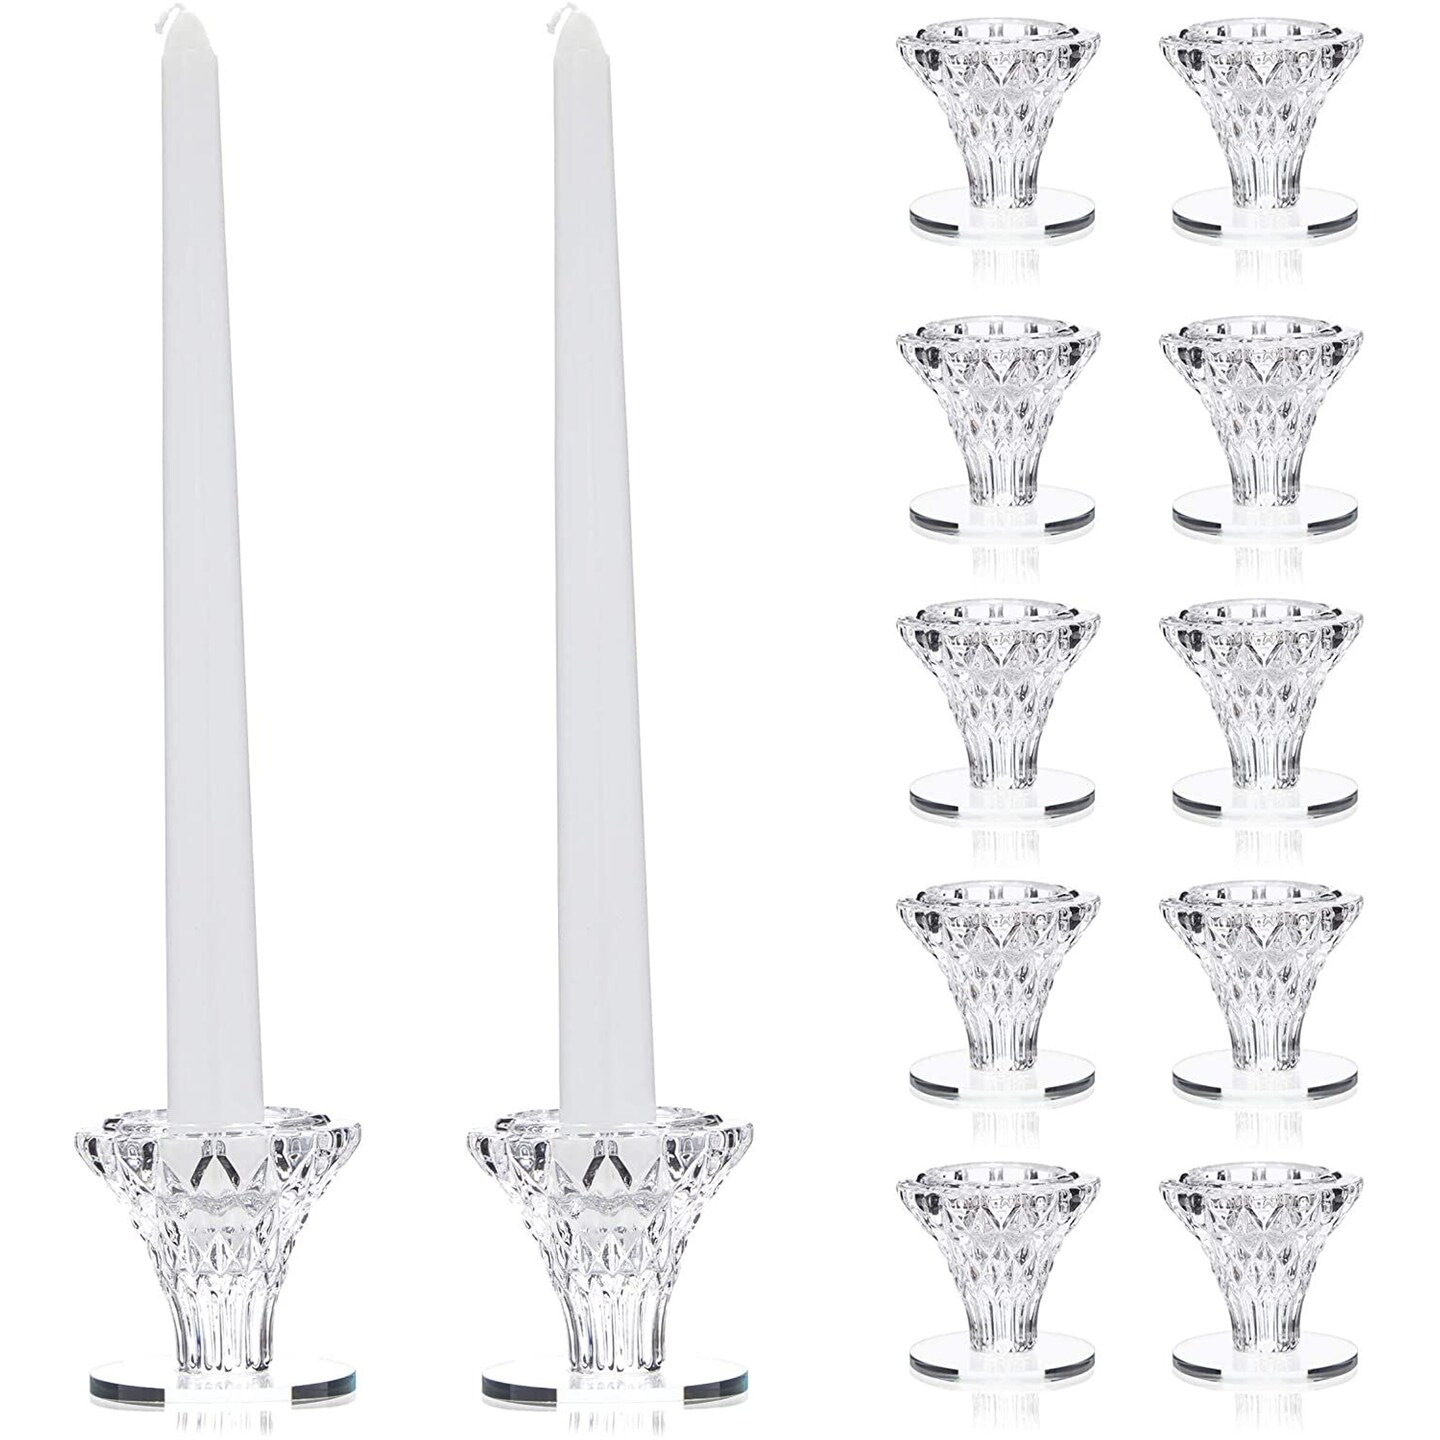 Set of 12 Glass Candlestick Holders- Small Taper Candle Holders for Wedding, Table Centerpieces, Home and Party D&#xE9;cor (2.4x2.3inch)